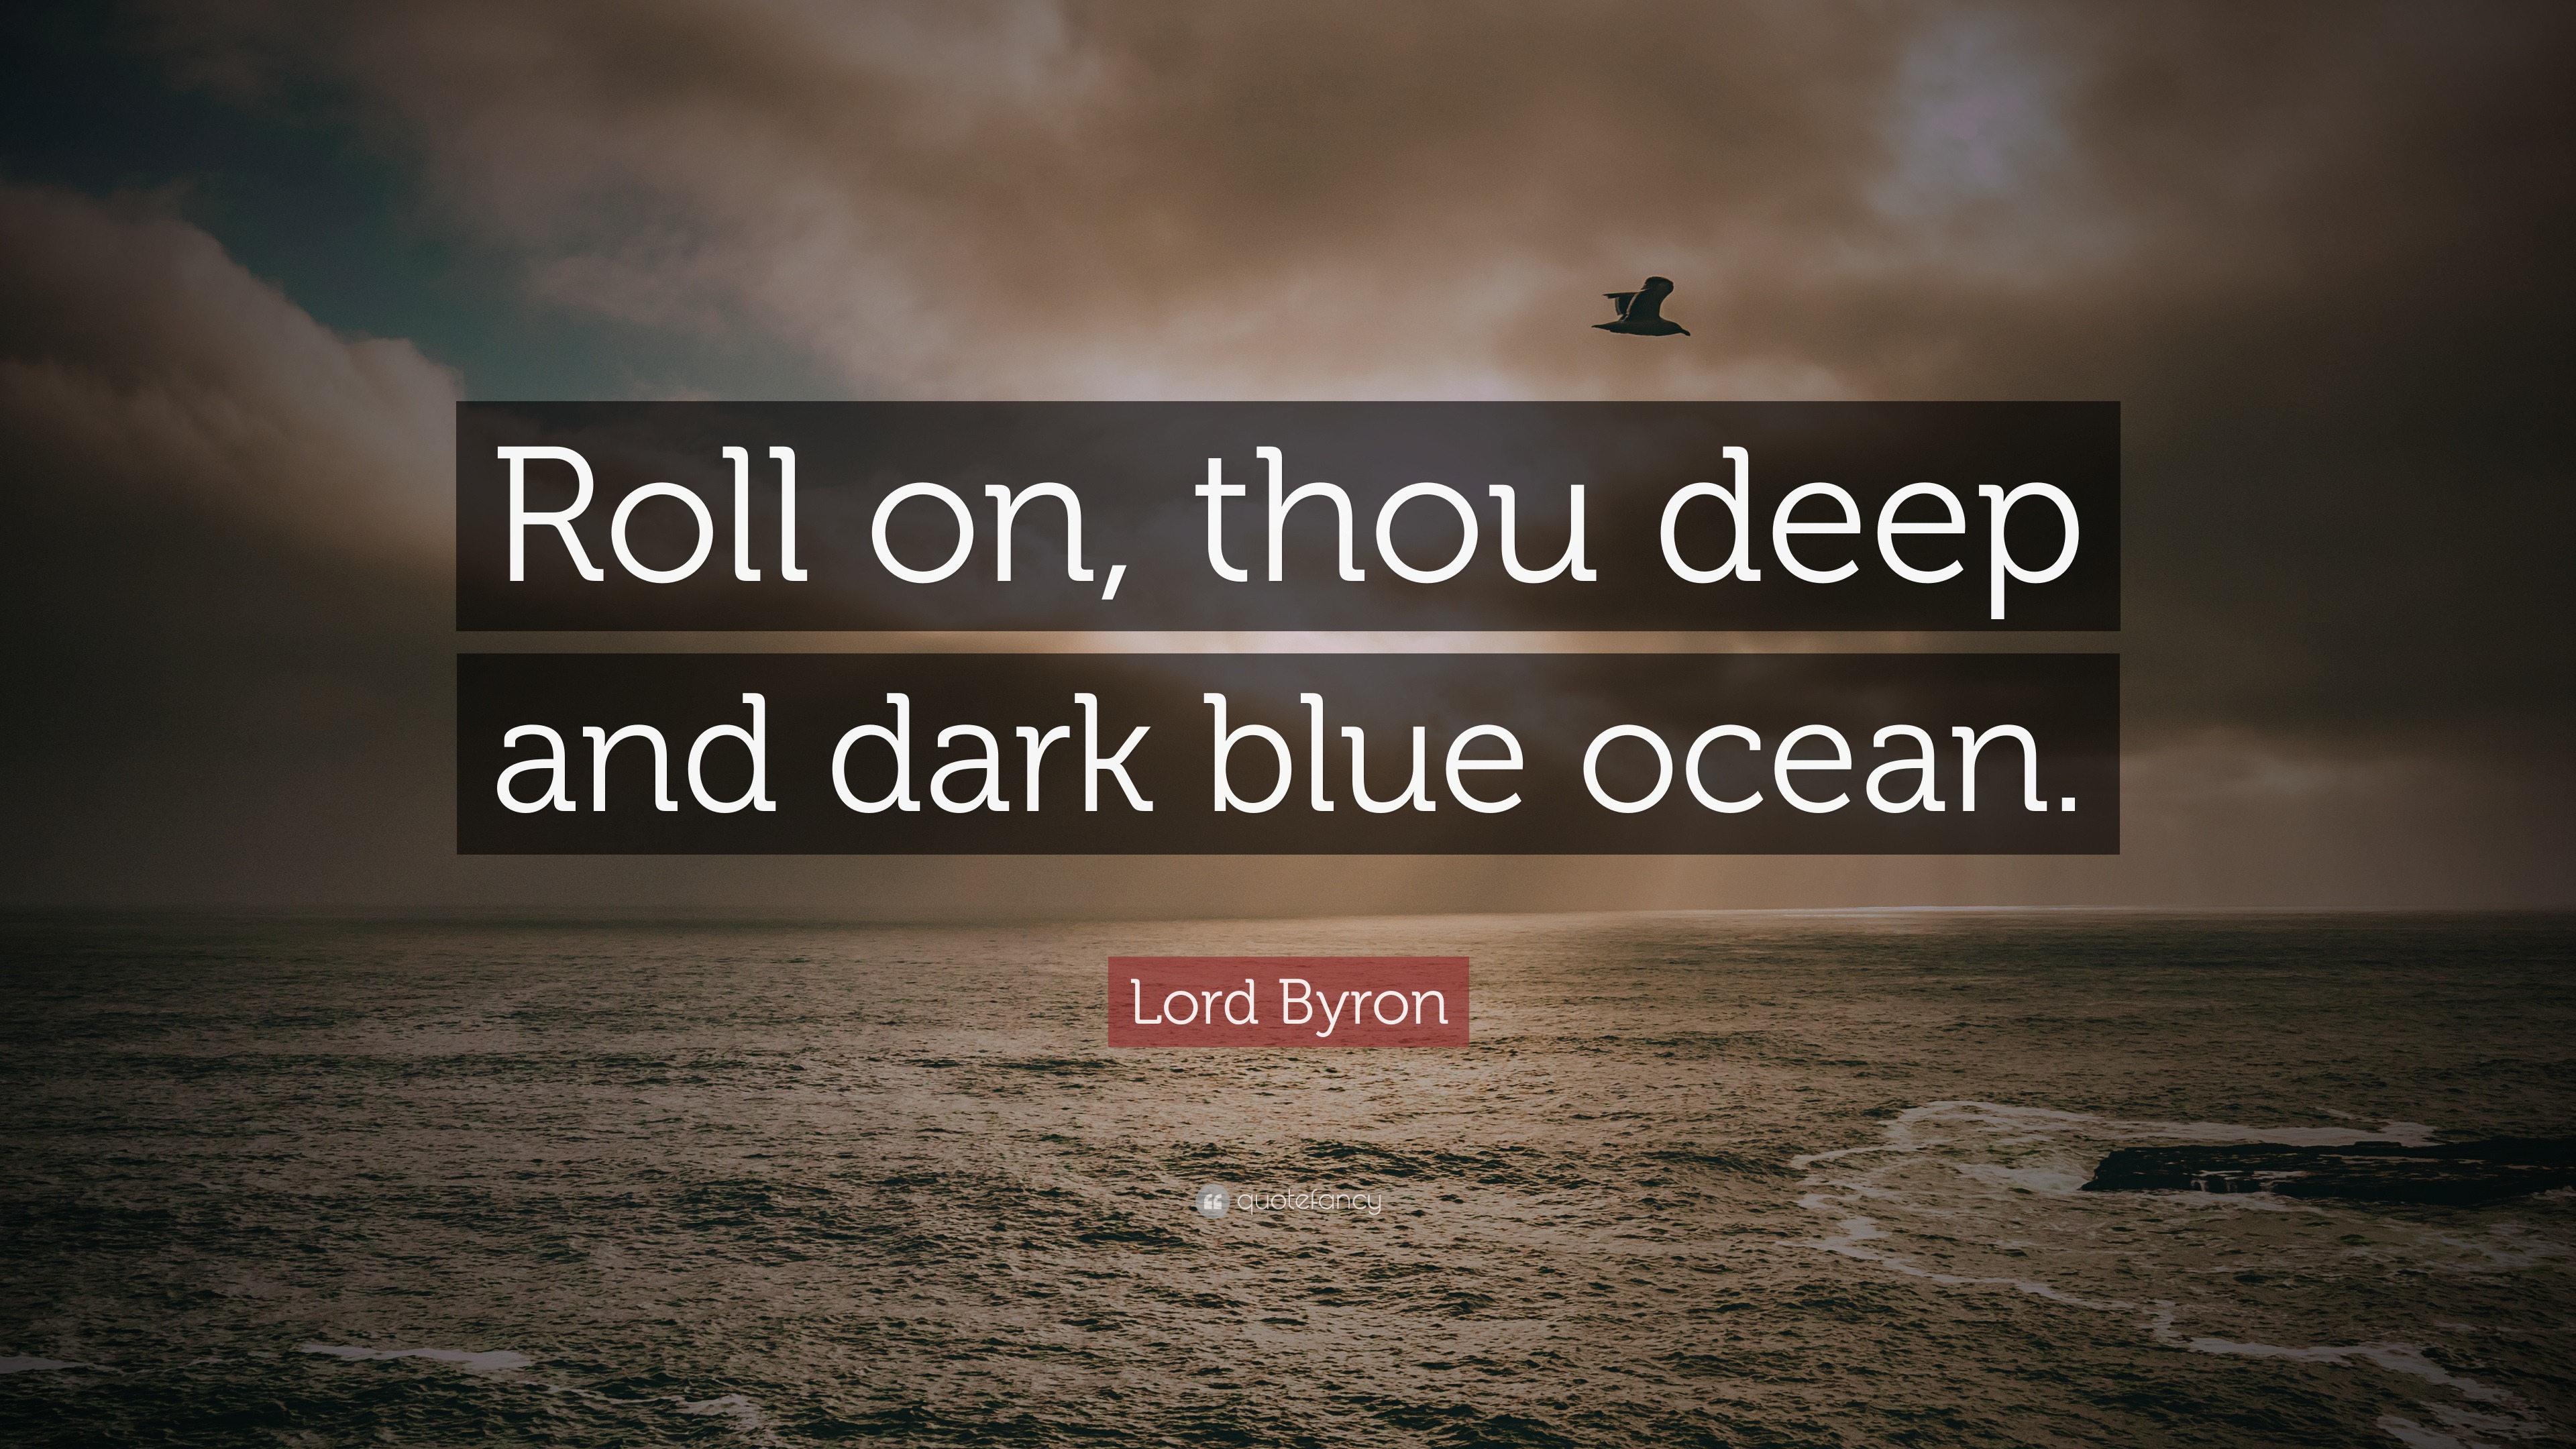 Lord Byron Quote: "Roll on, thou deep and dark blue ocean."